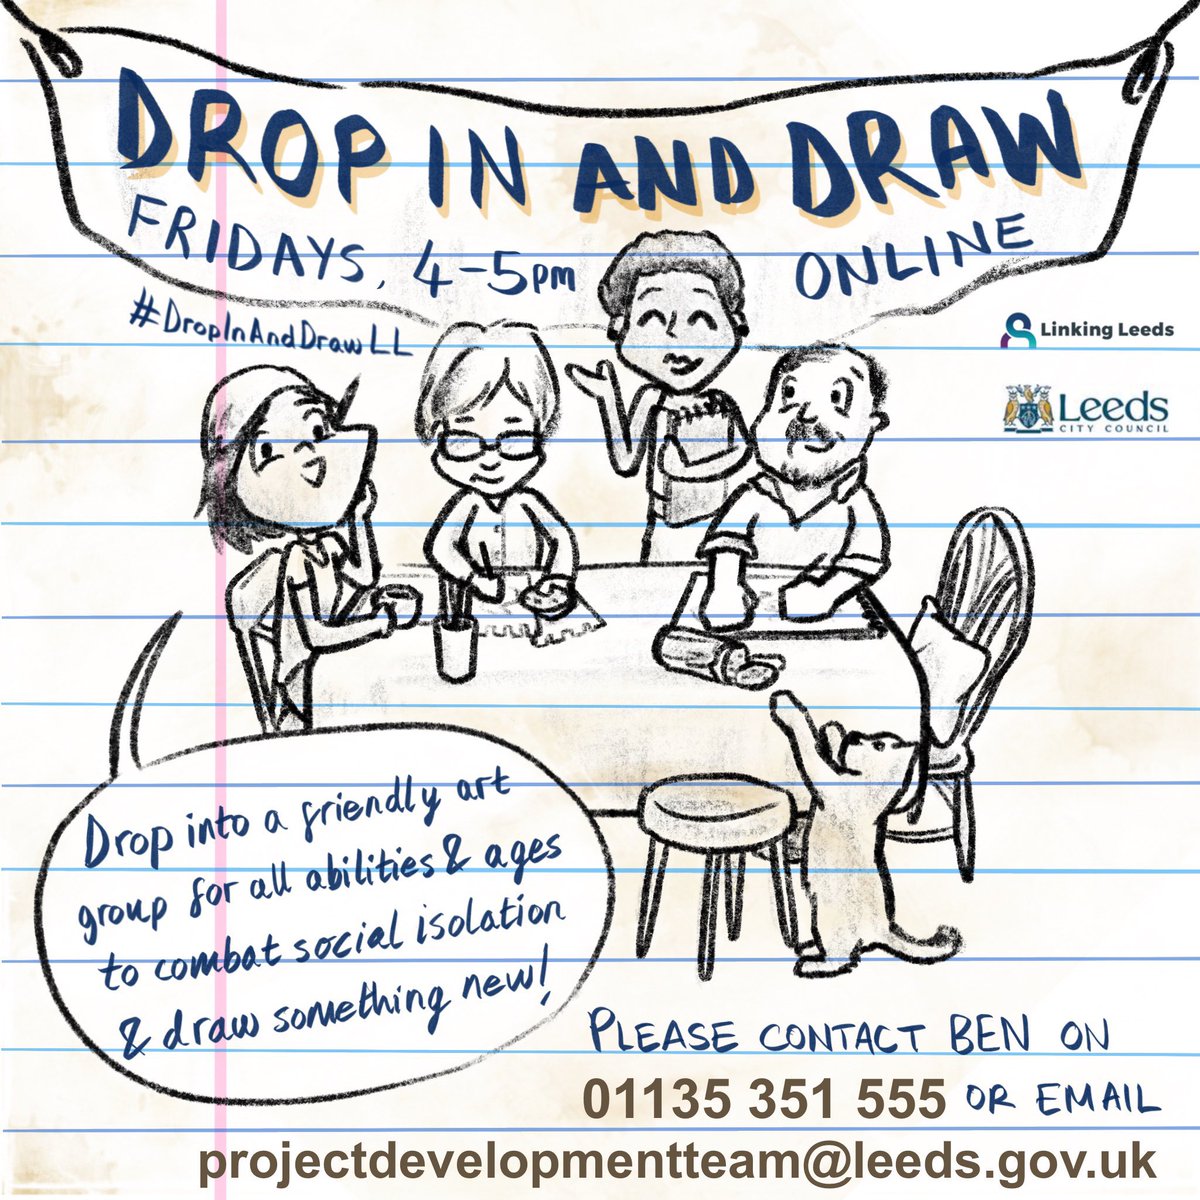 It's the eve of a sunny weekend and our budding artists are still in full focus. 🎨🖍️🖌️To get the creative juices flowing and unwind after a hard week, please contact us! Drop in and Draw- Fridays 4-5pm.